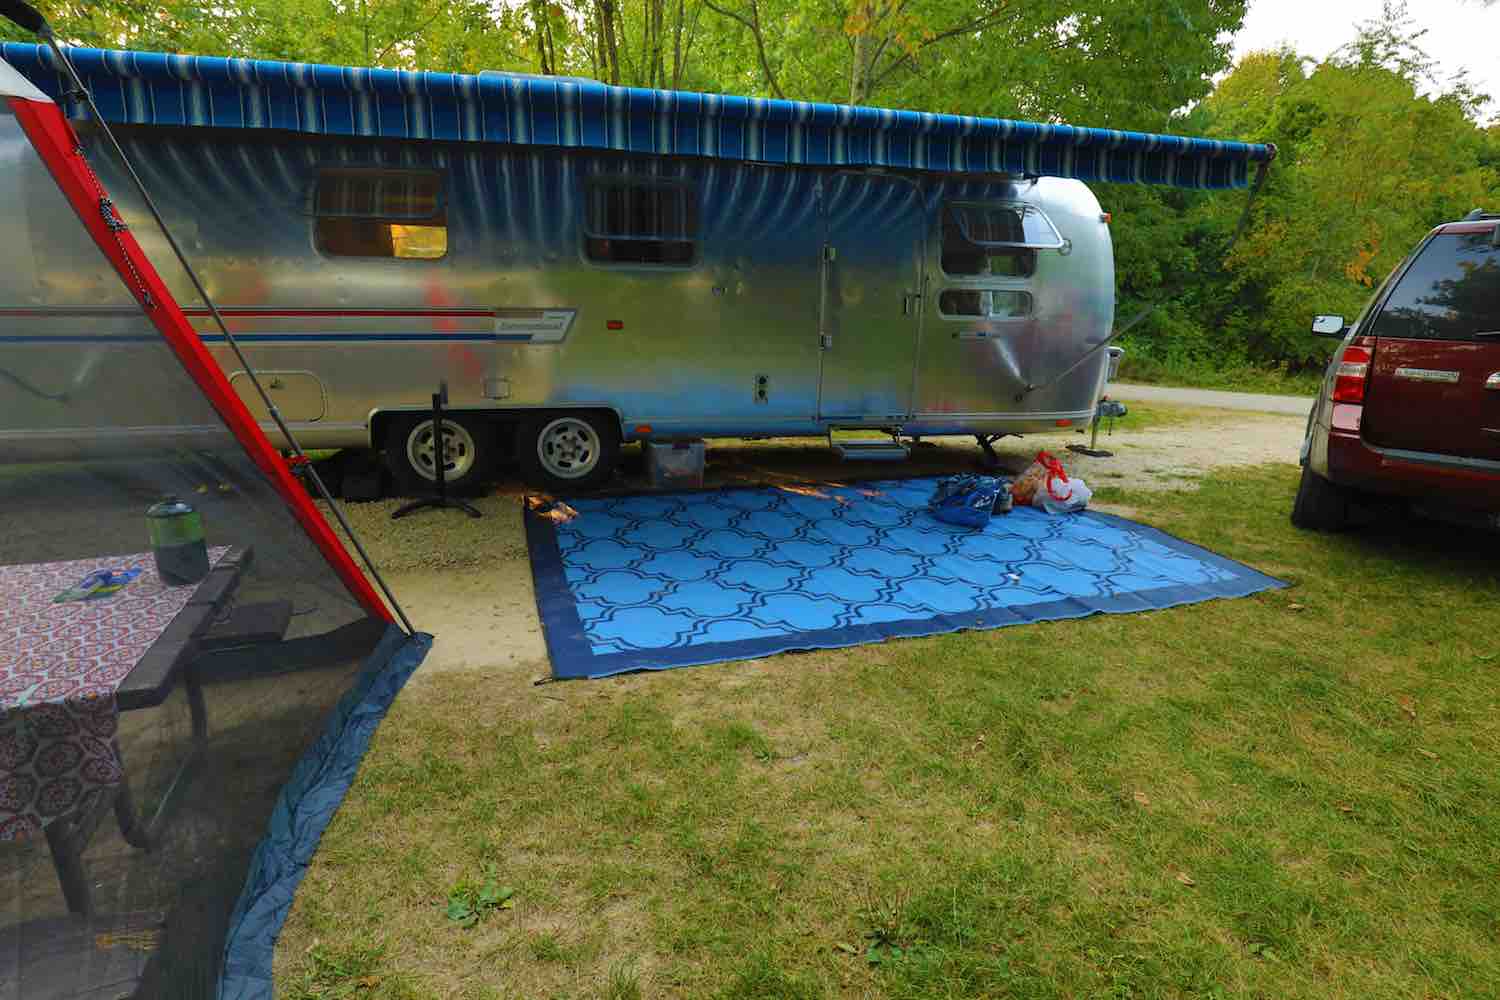 We are ready to camp in our Airstream RV Trailer.